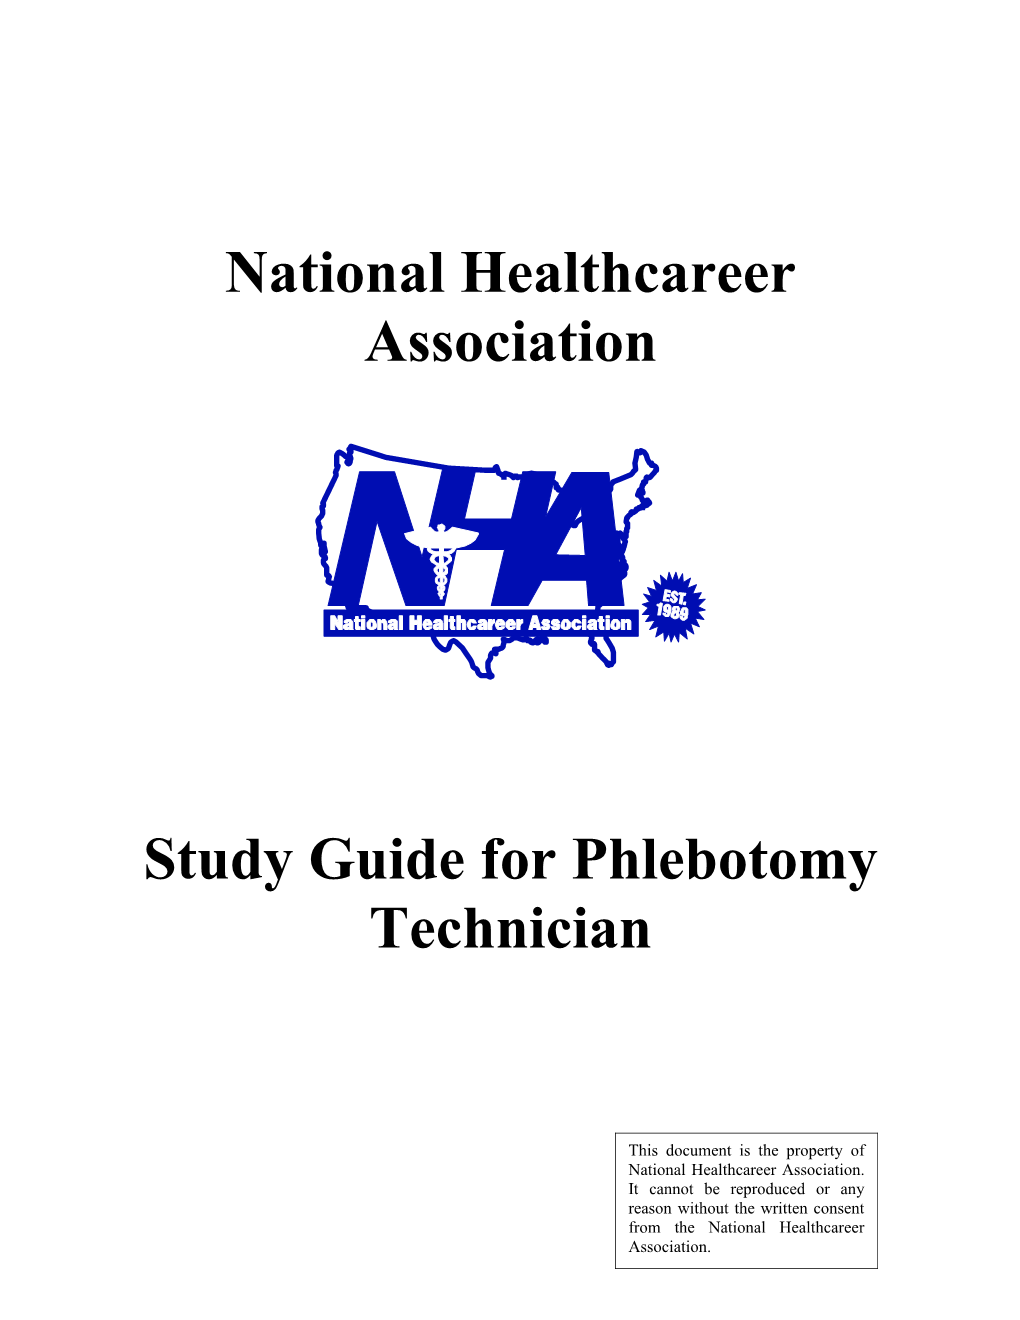 Study Guide for Phlebotomy Technician